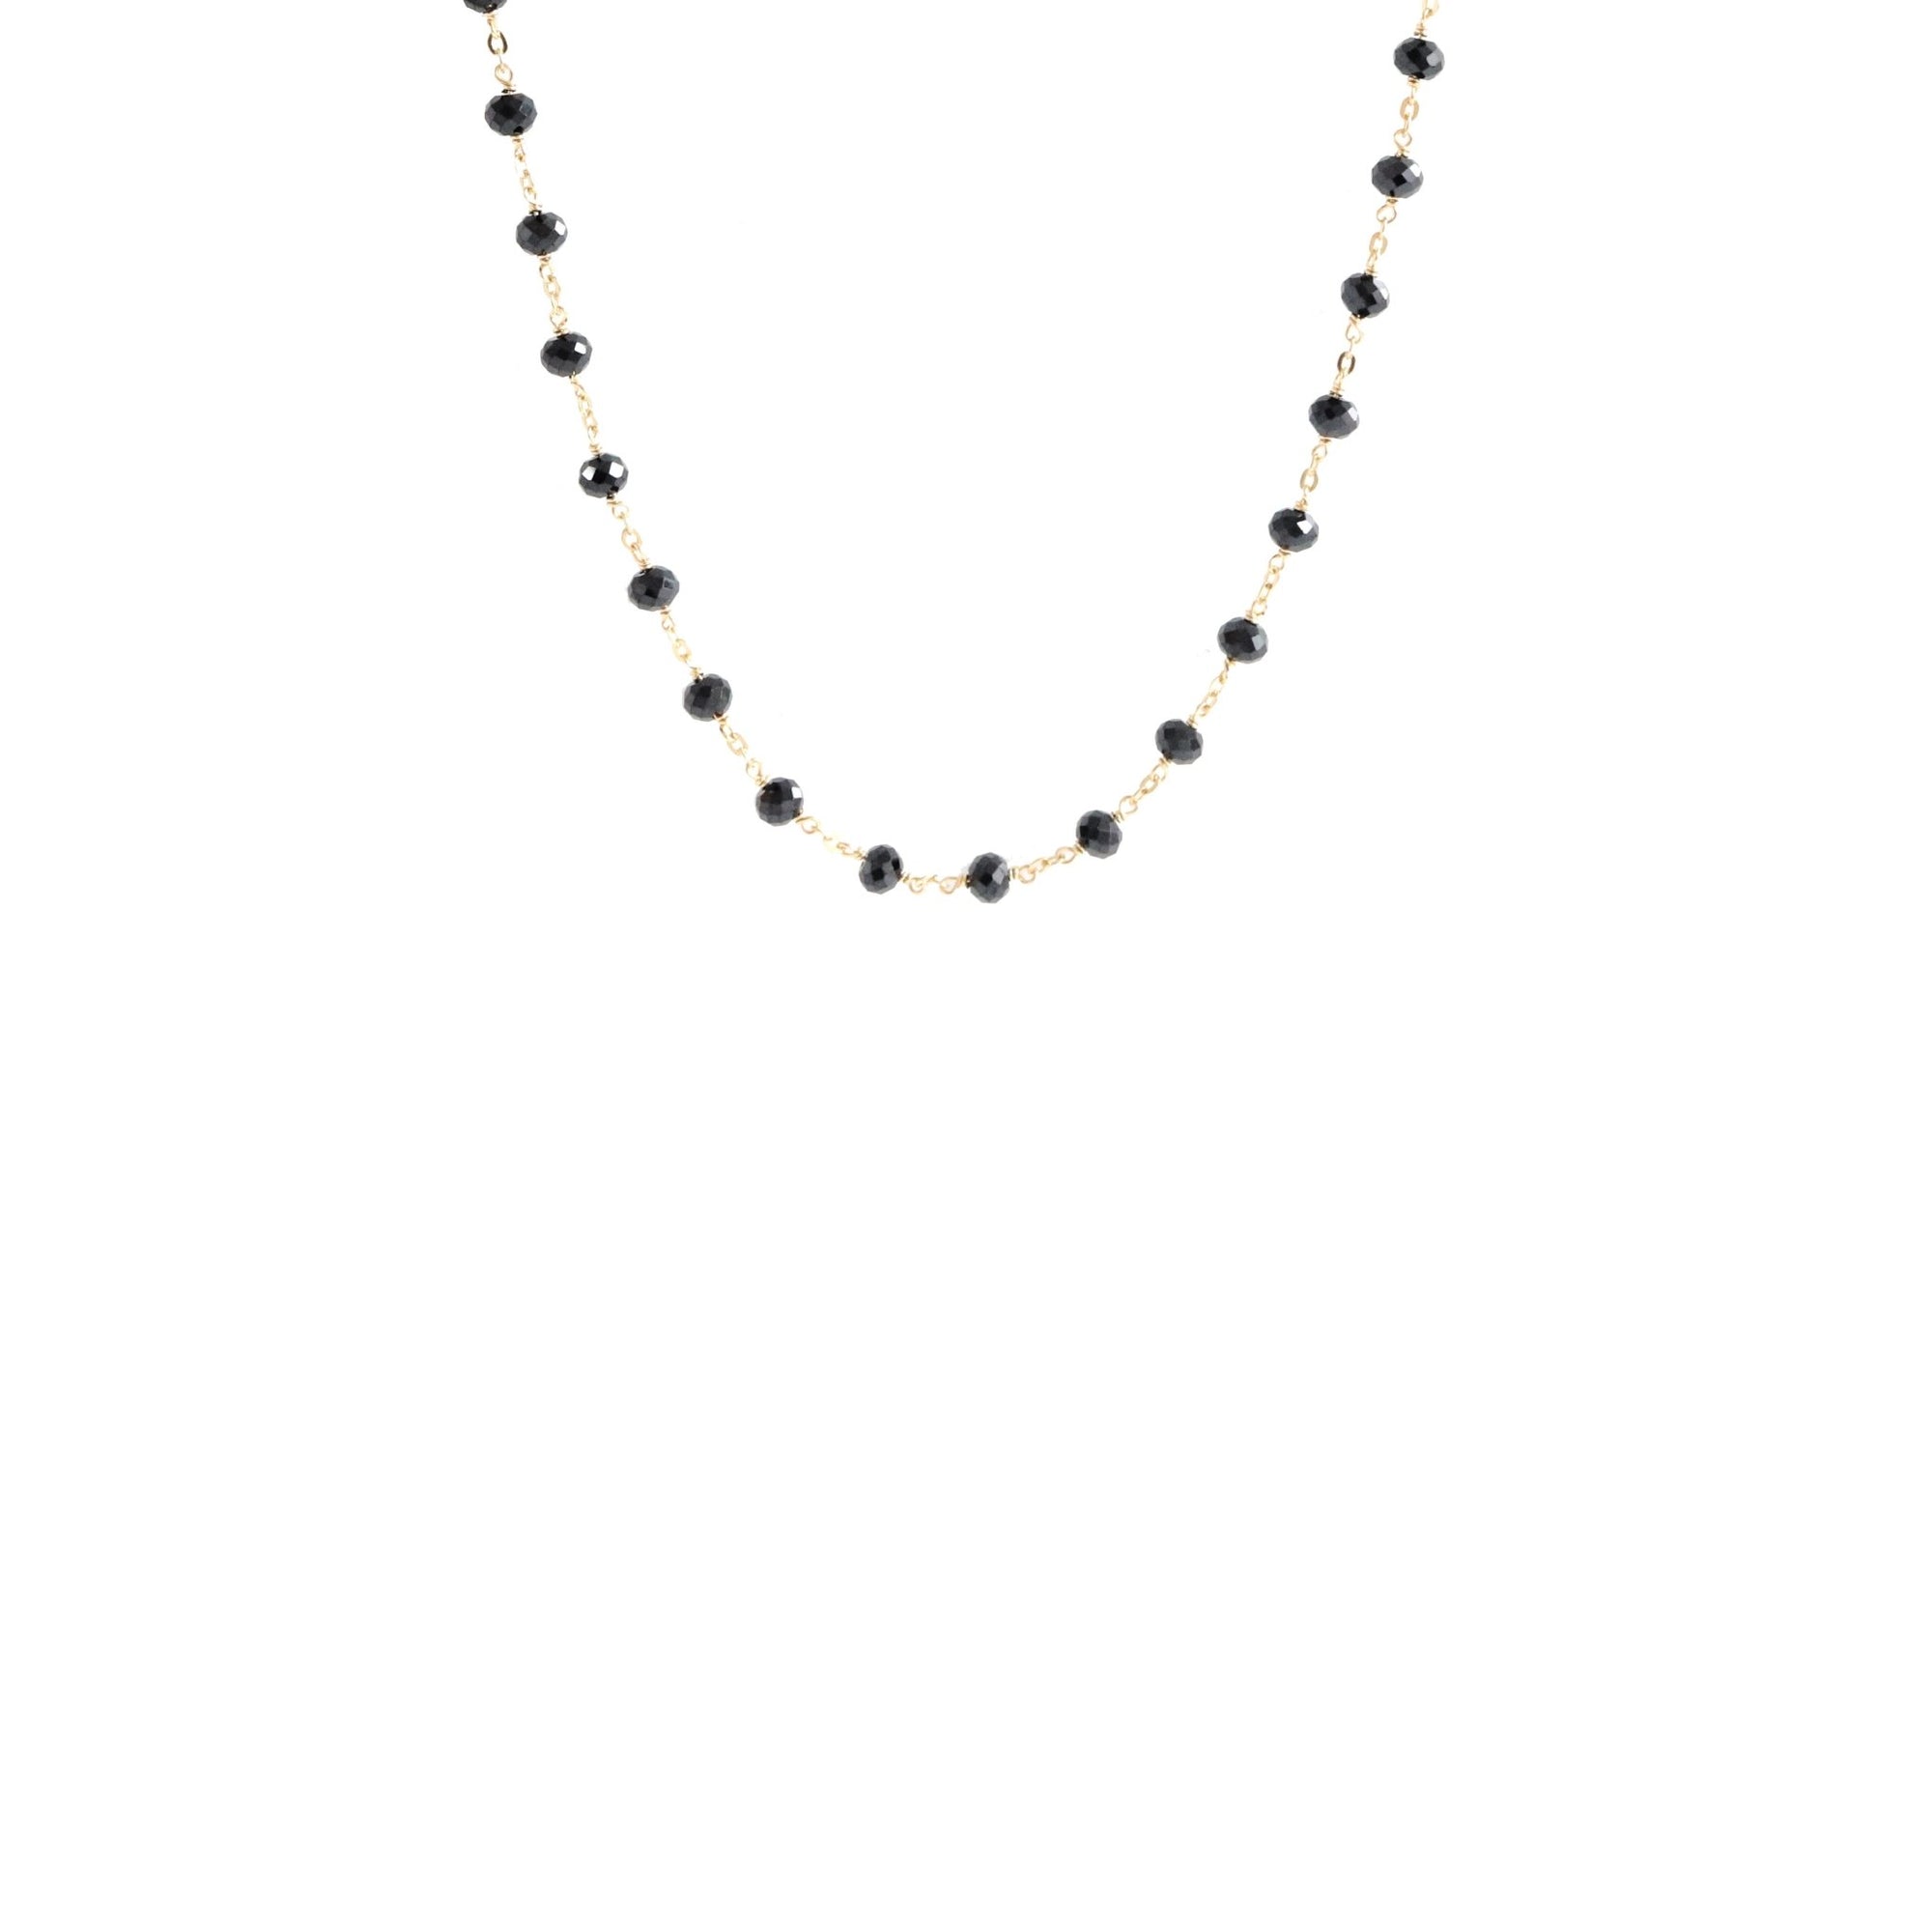 ICONIC SHORT BEADED NECKLACE - BLACK ONYX & GOLD 16-20" - SO PRETTY CARA COTTER